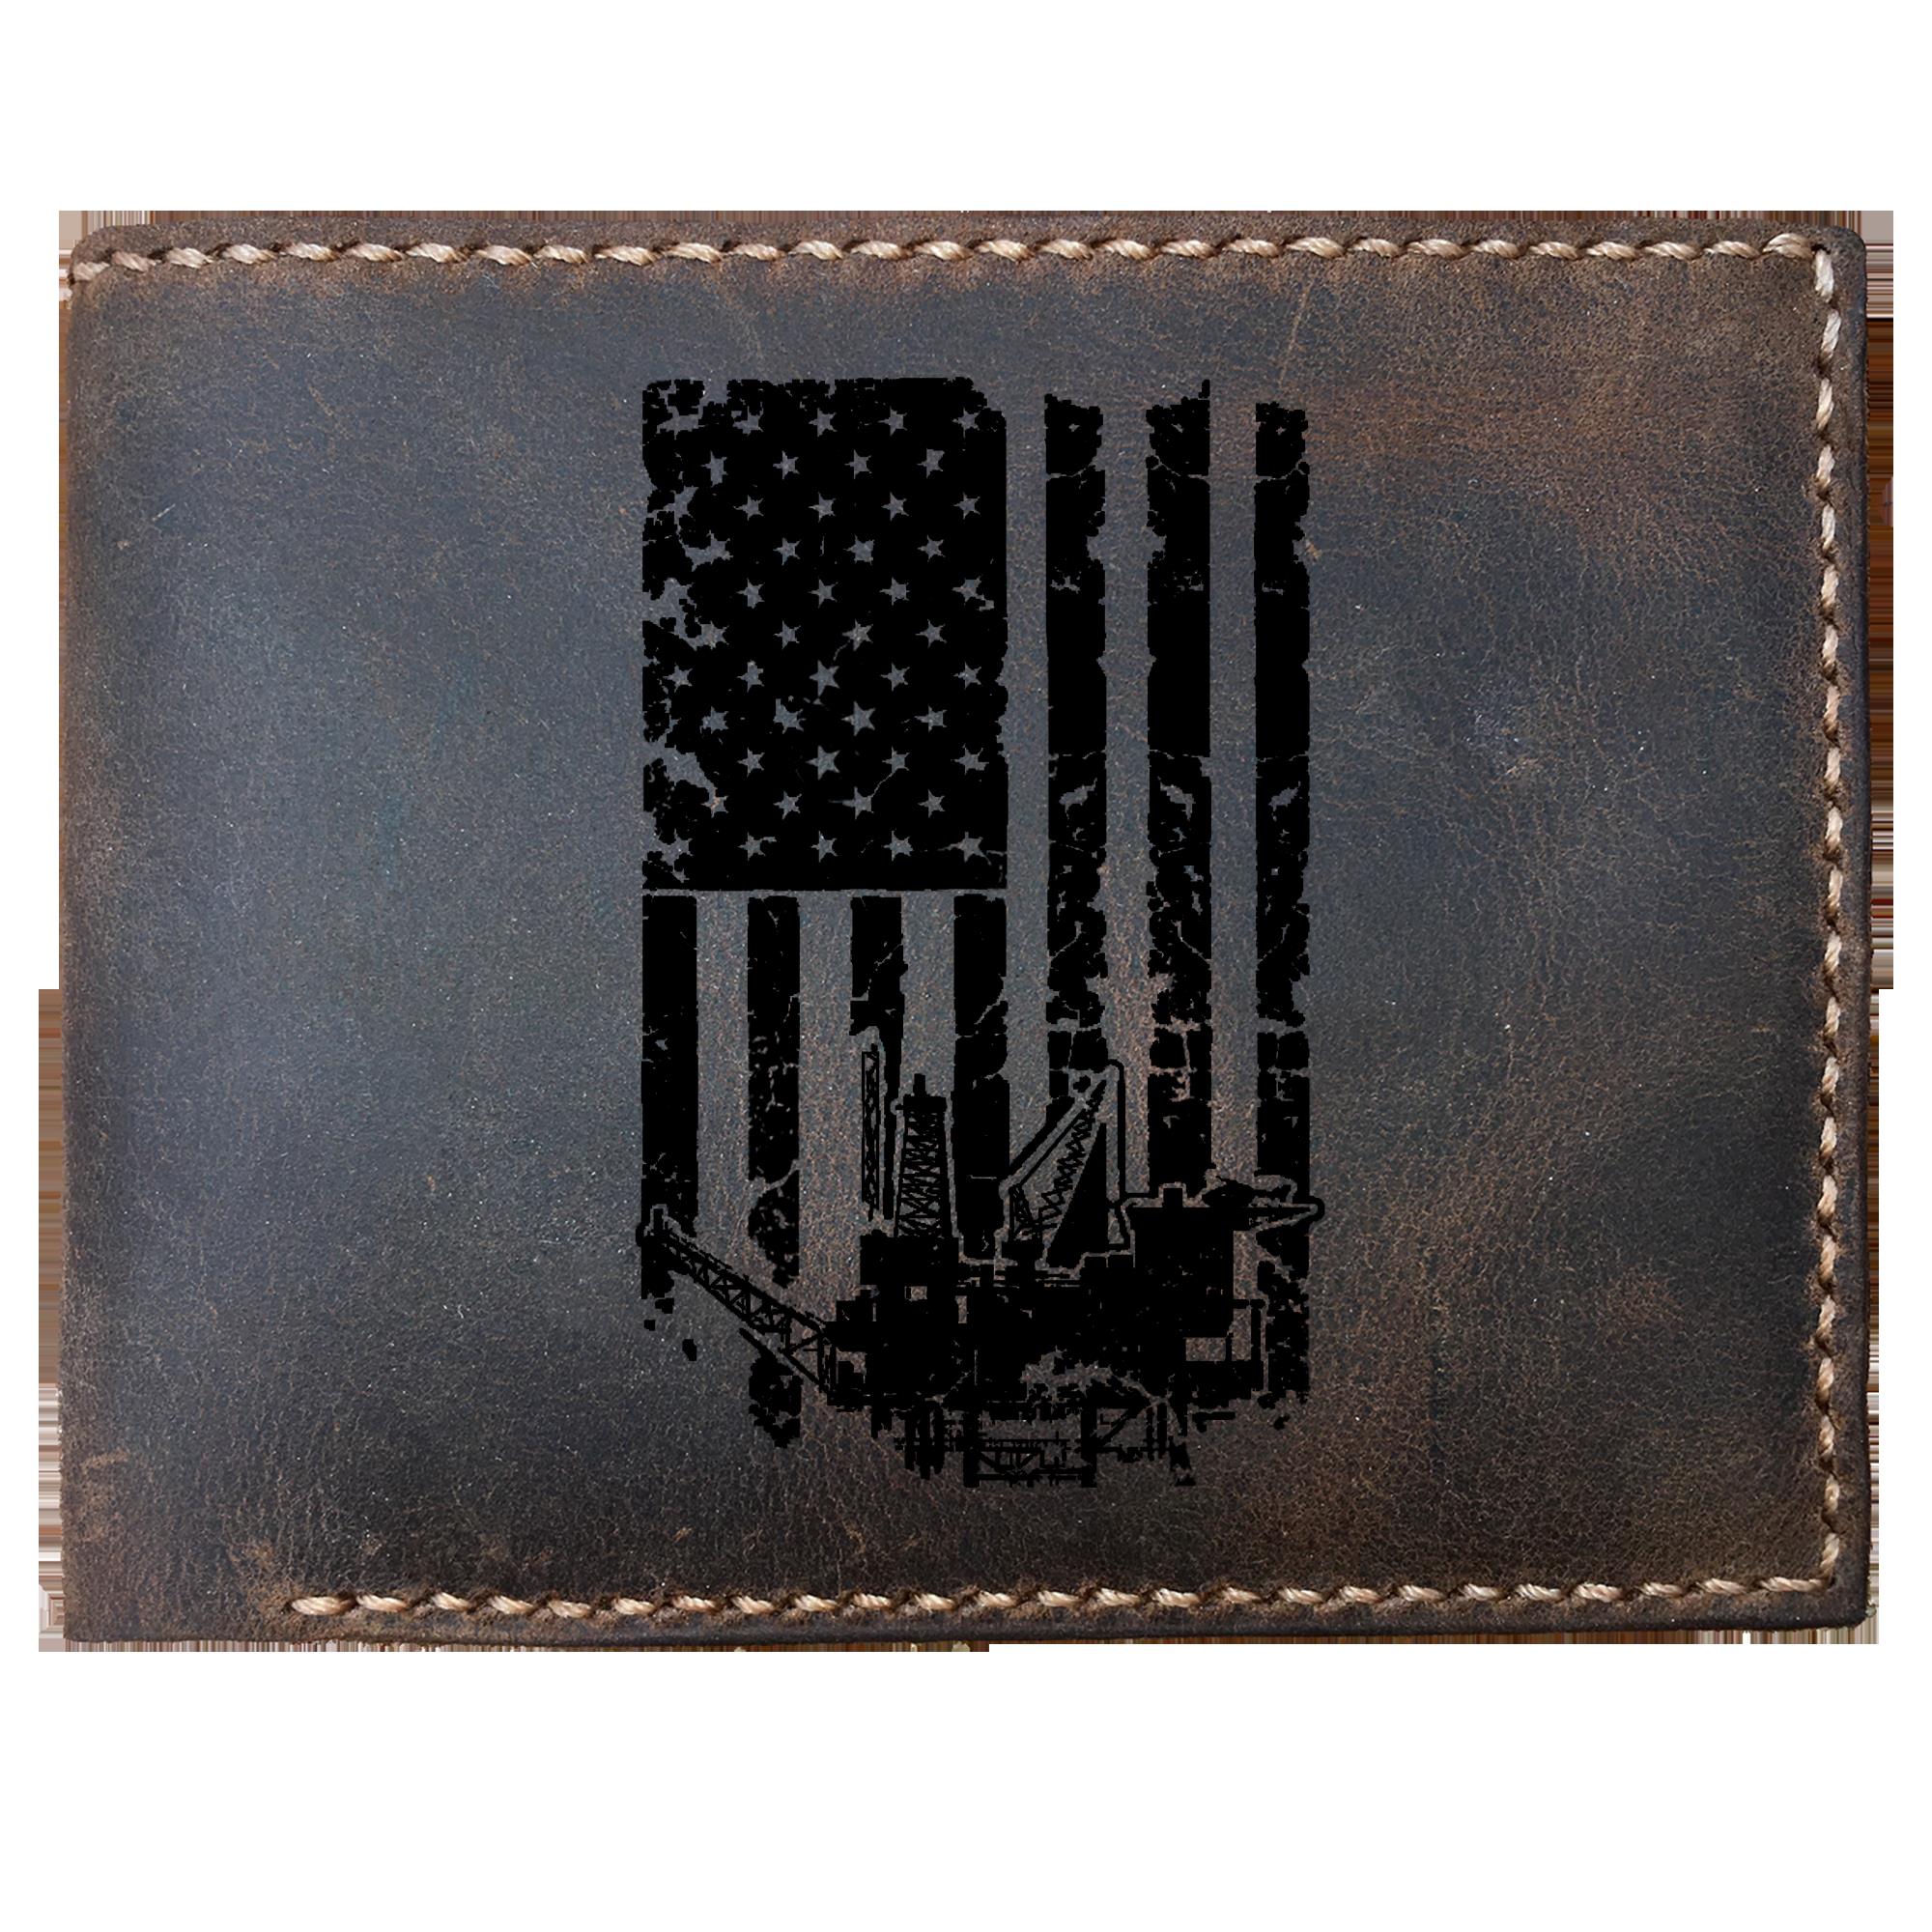 Skitongifts Funny Custom Laser Engraved Bifold Leather Wallet For Men, Oil Flag Oil Field Drilling Rig Us Super Cool For The Oil Rigger